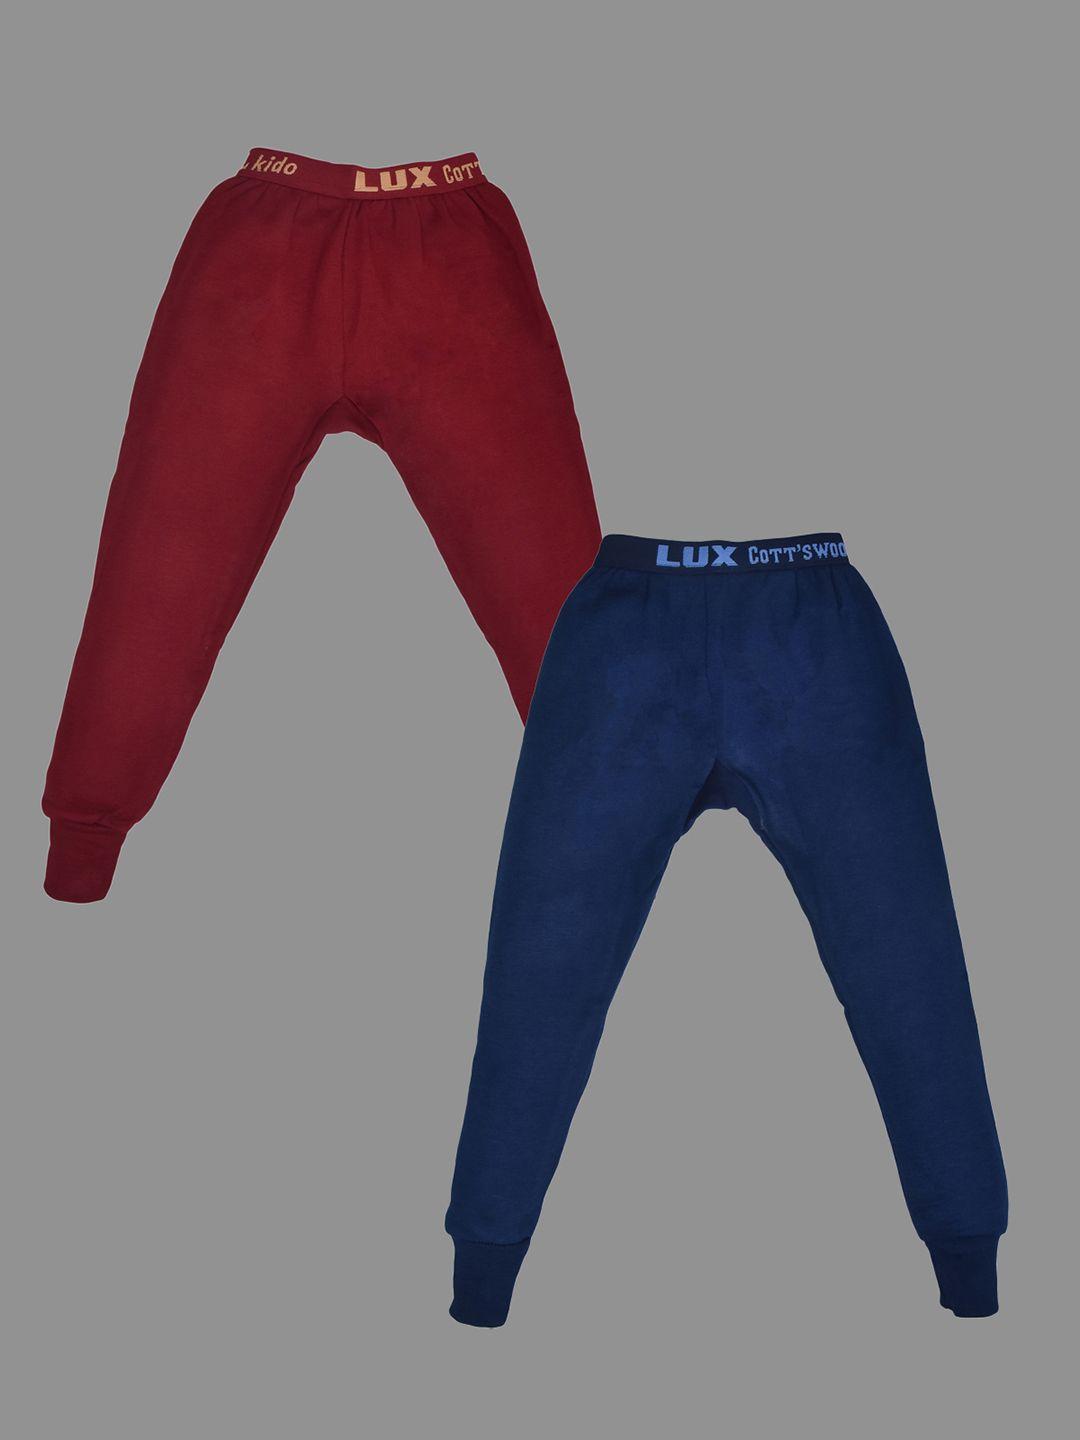 lux-cottswool-boys-pack-of-2-solid-cotton-thermal-bottoms